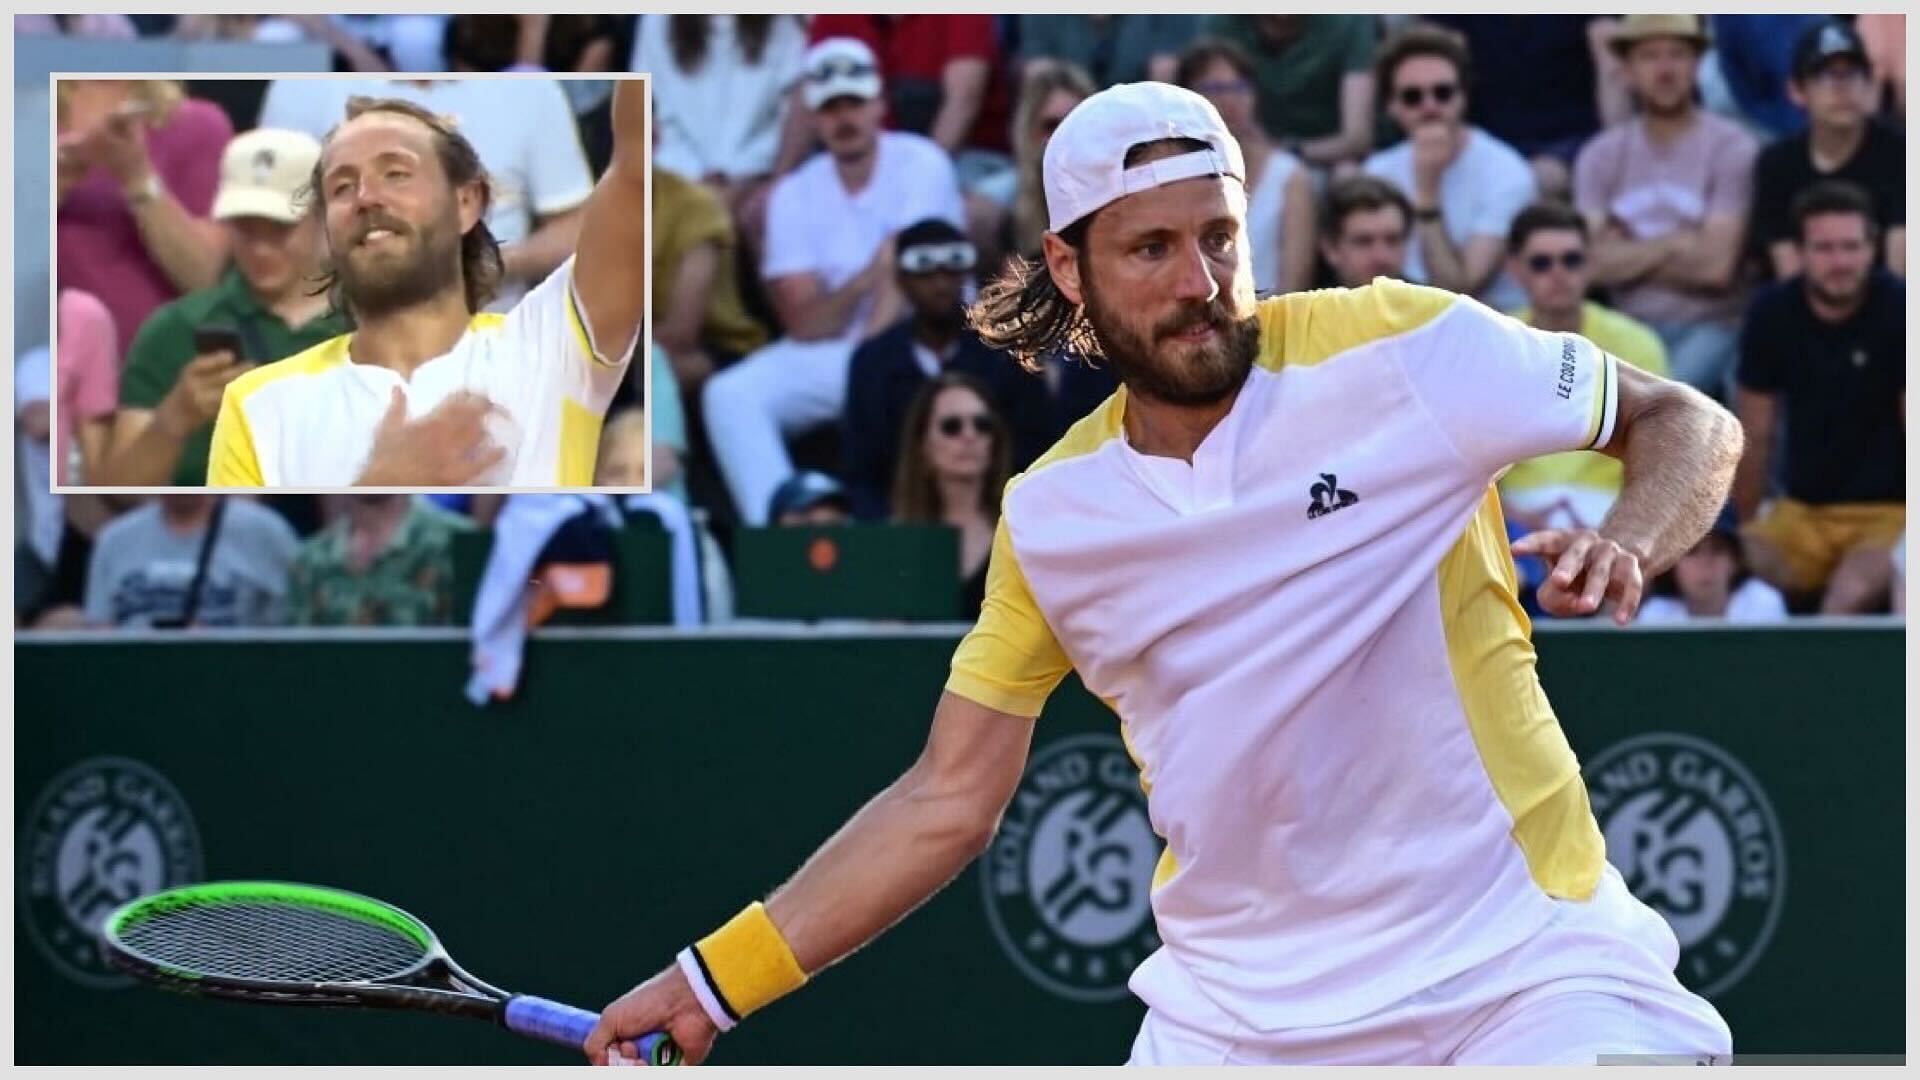 Lucas Pouille leads French Open crowd in emotional rendition of French national anthem